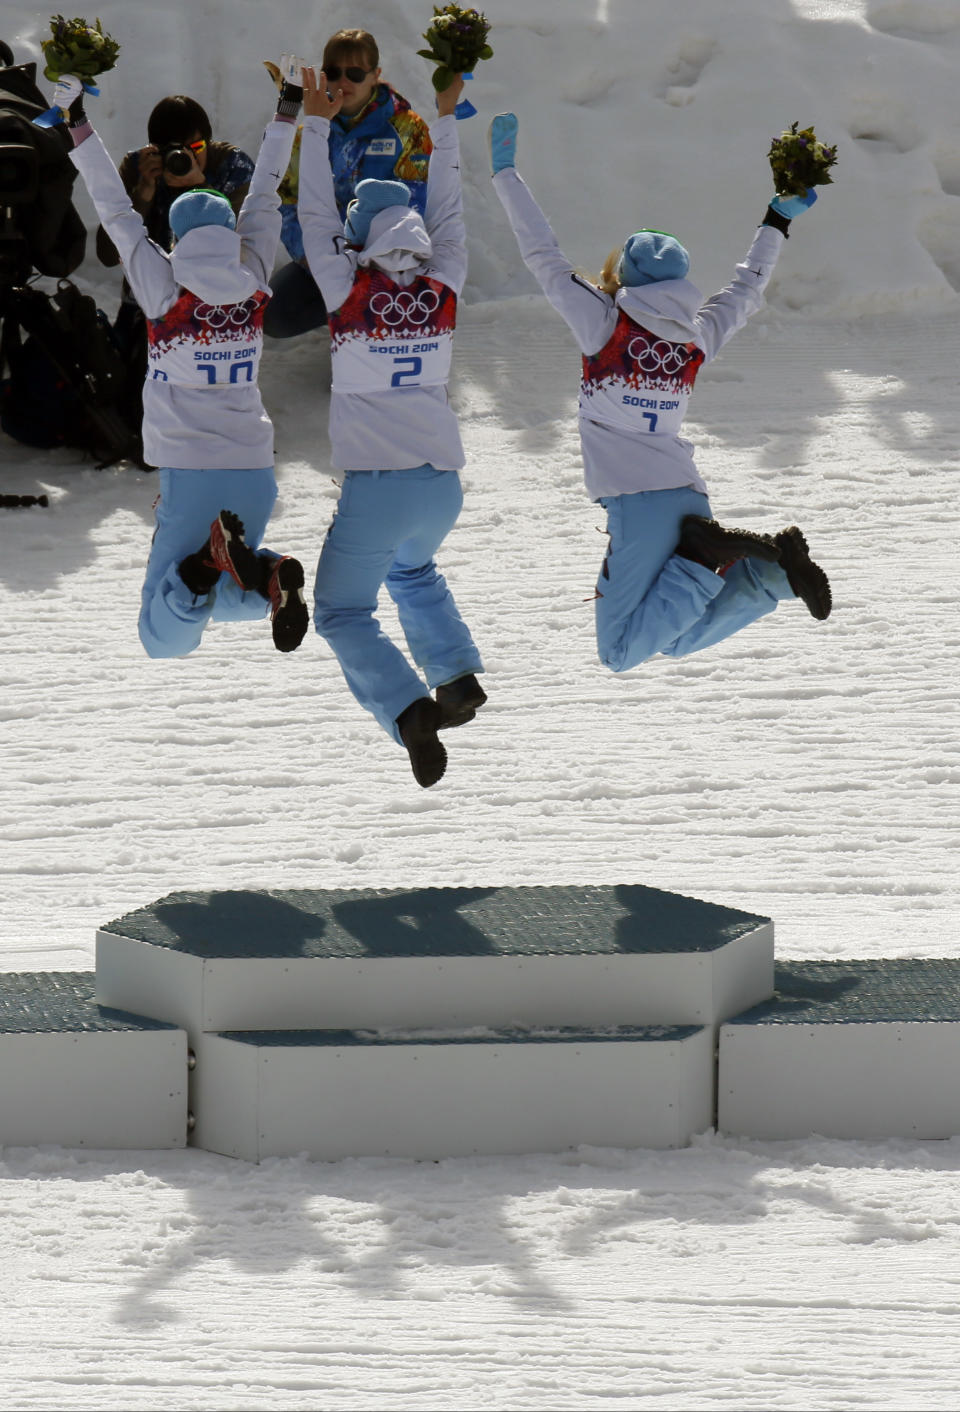 From left, bronze medalist Norway's Kristin Stoermer Steira, gold medalist Norway's Marit Bjoergen and silver medalist Norway's Therese Johaug jump in celebration during the flowers ceremony for the women's 30K cross-country race at the 2014 Winter Olympics, Saturday, Feb. 22, 2014, in Krasnaya Polyana, Russia. (AP Photo/Dmitry Lovetsky)